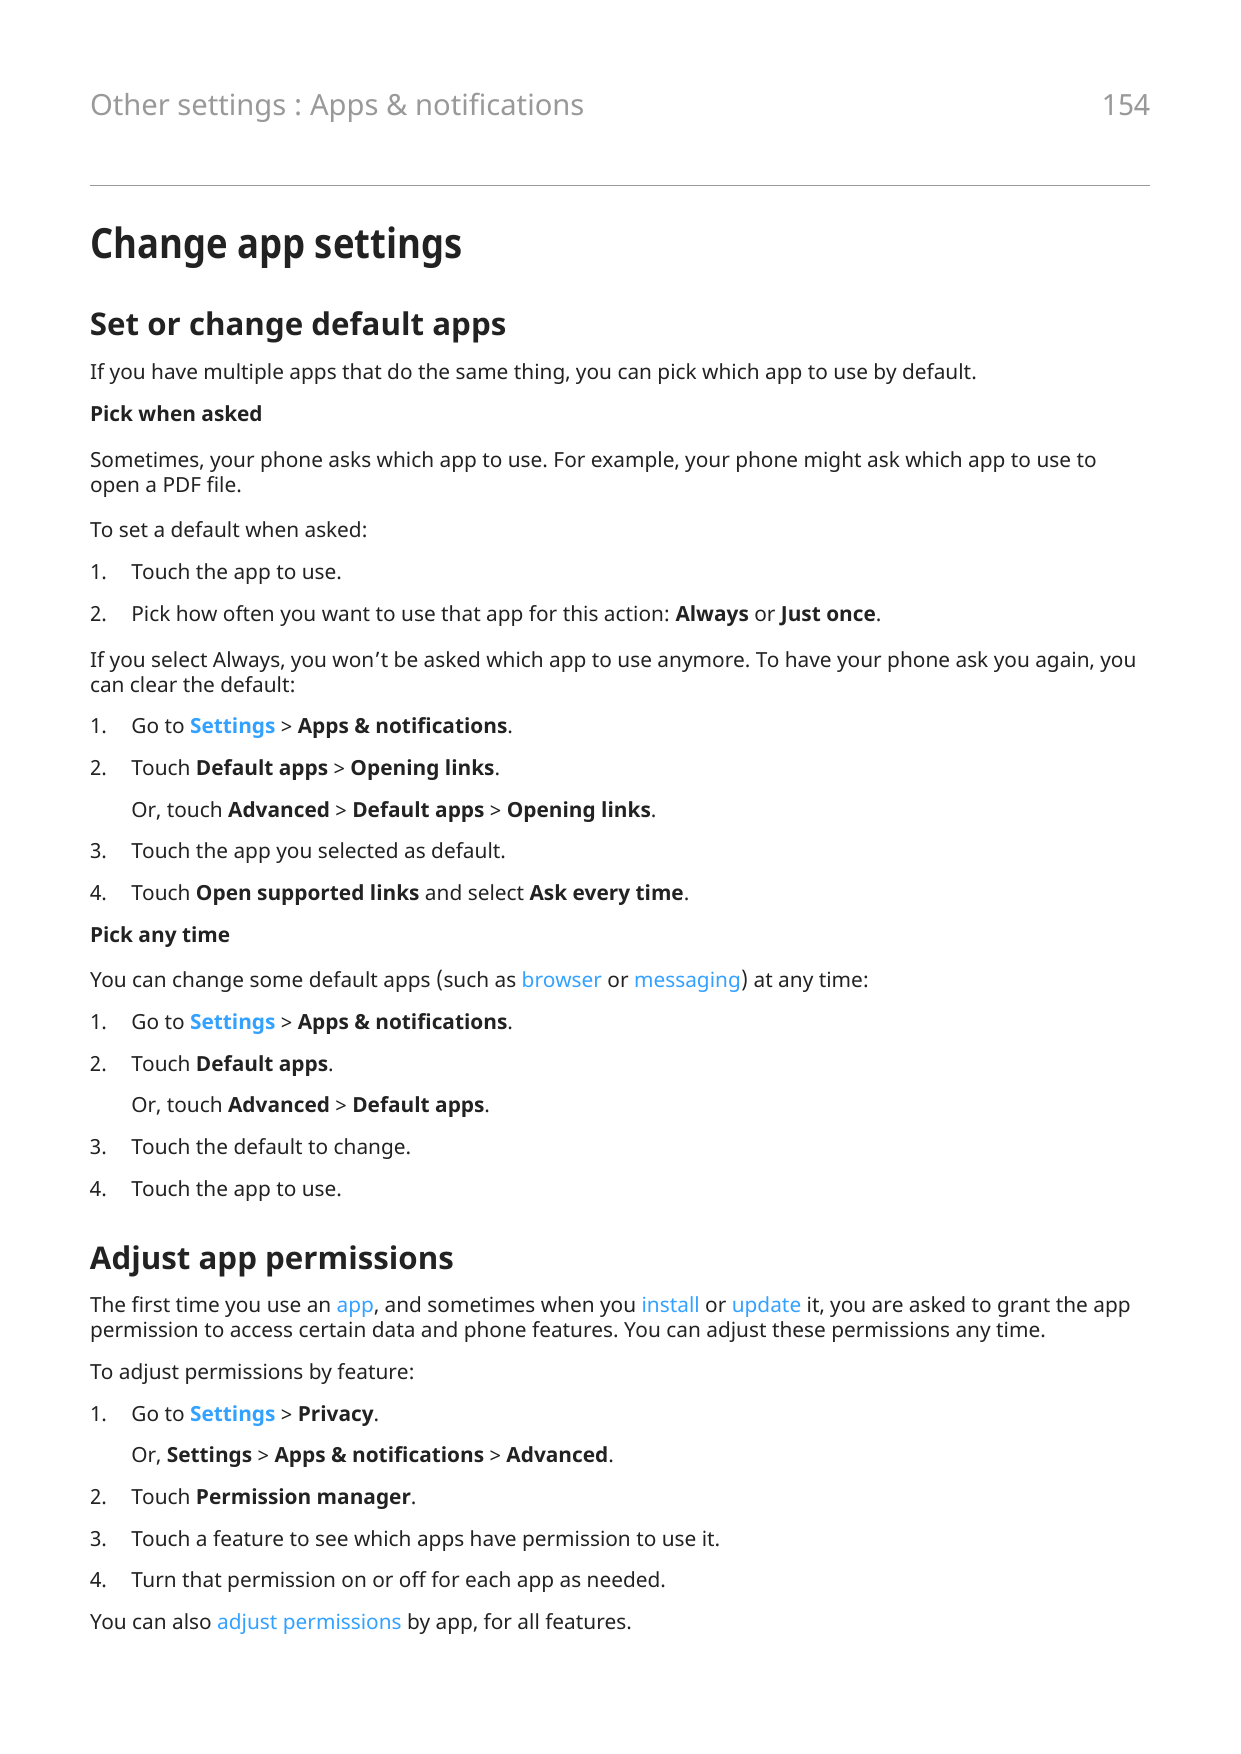 Other settings : Apps & notifications154Change app settingsSet or change default appsIf you have multiple apps that do the same 